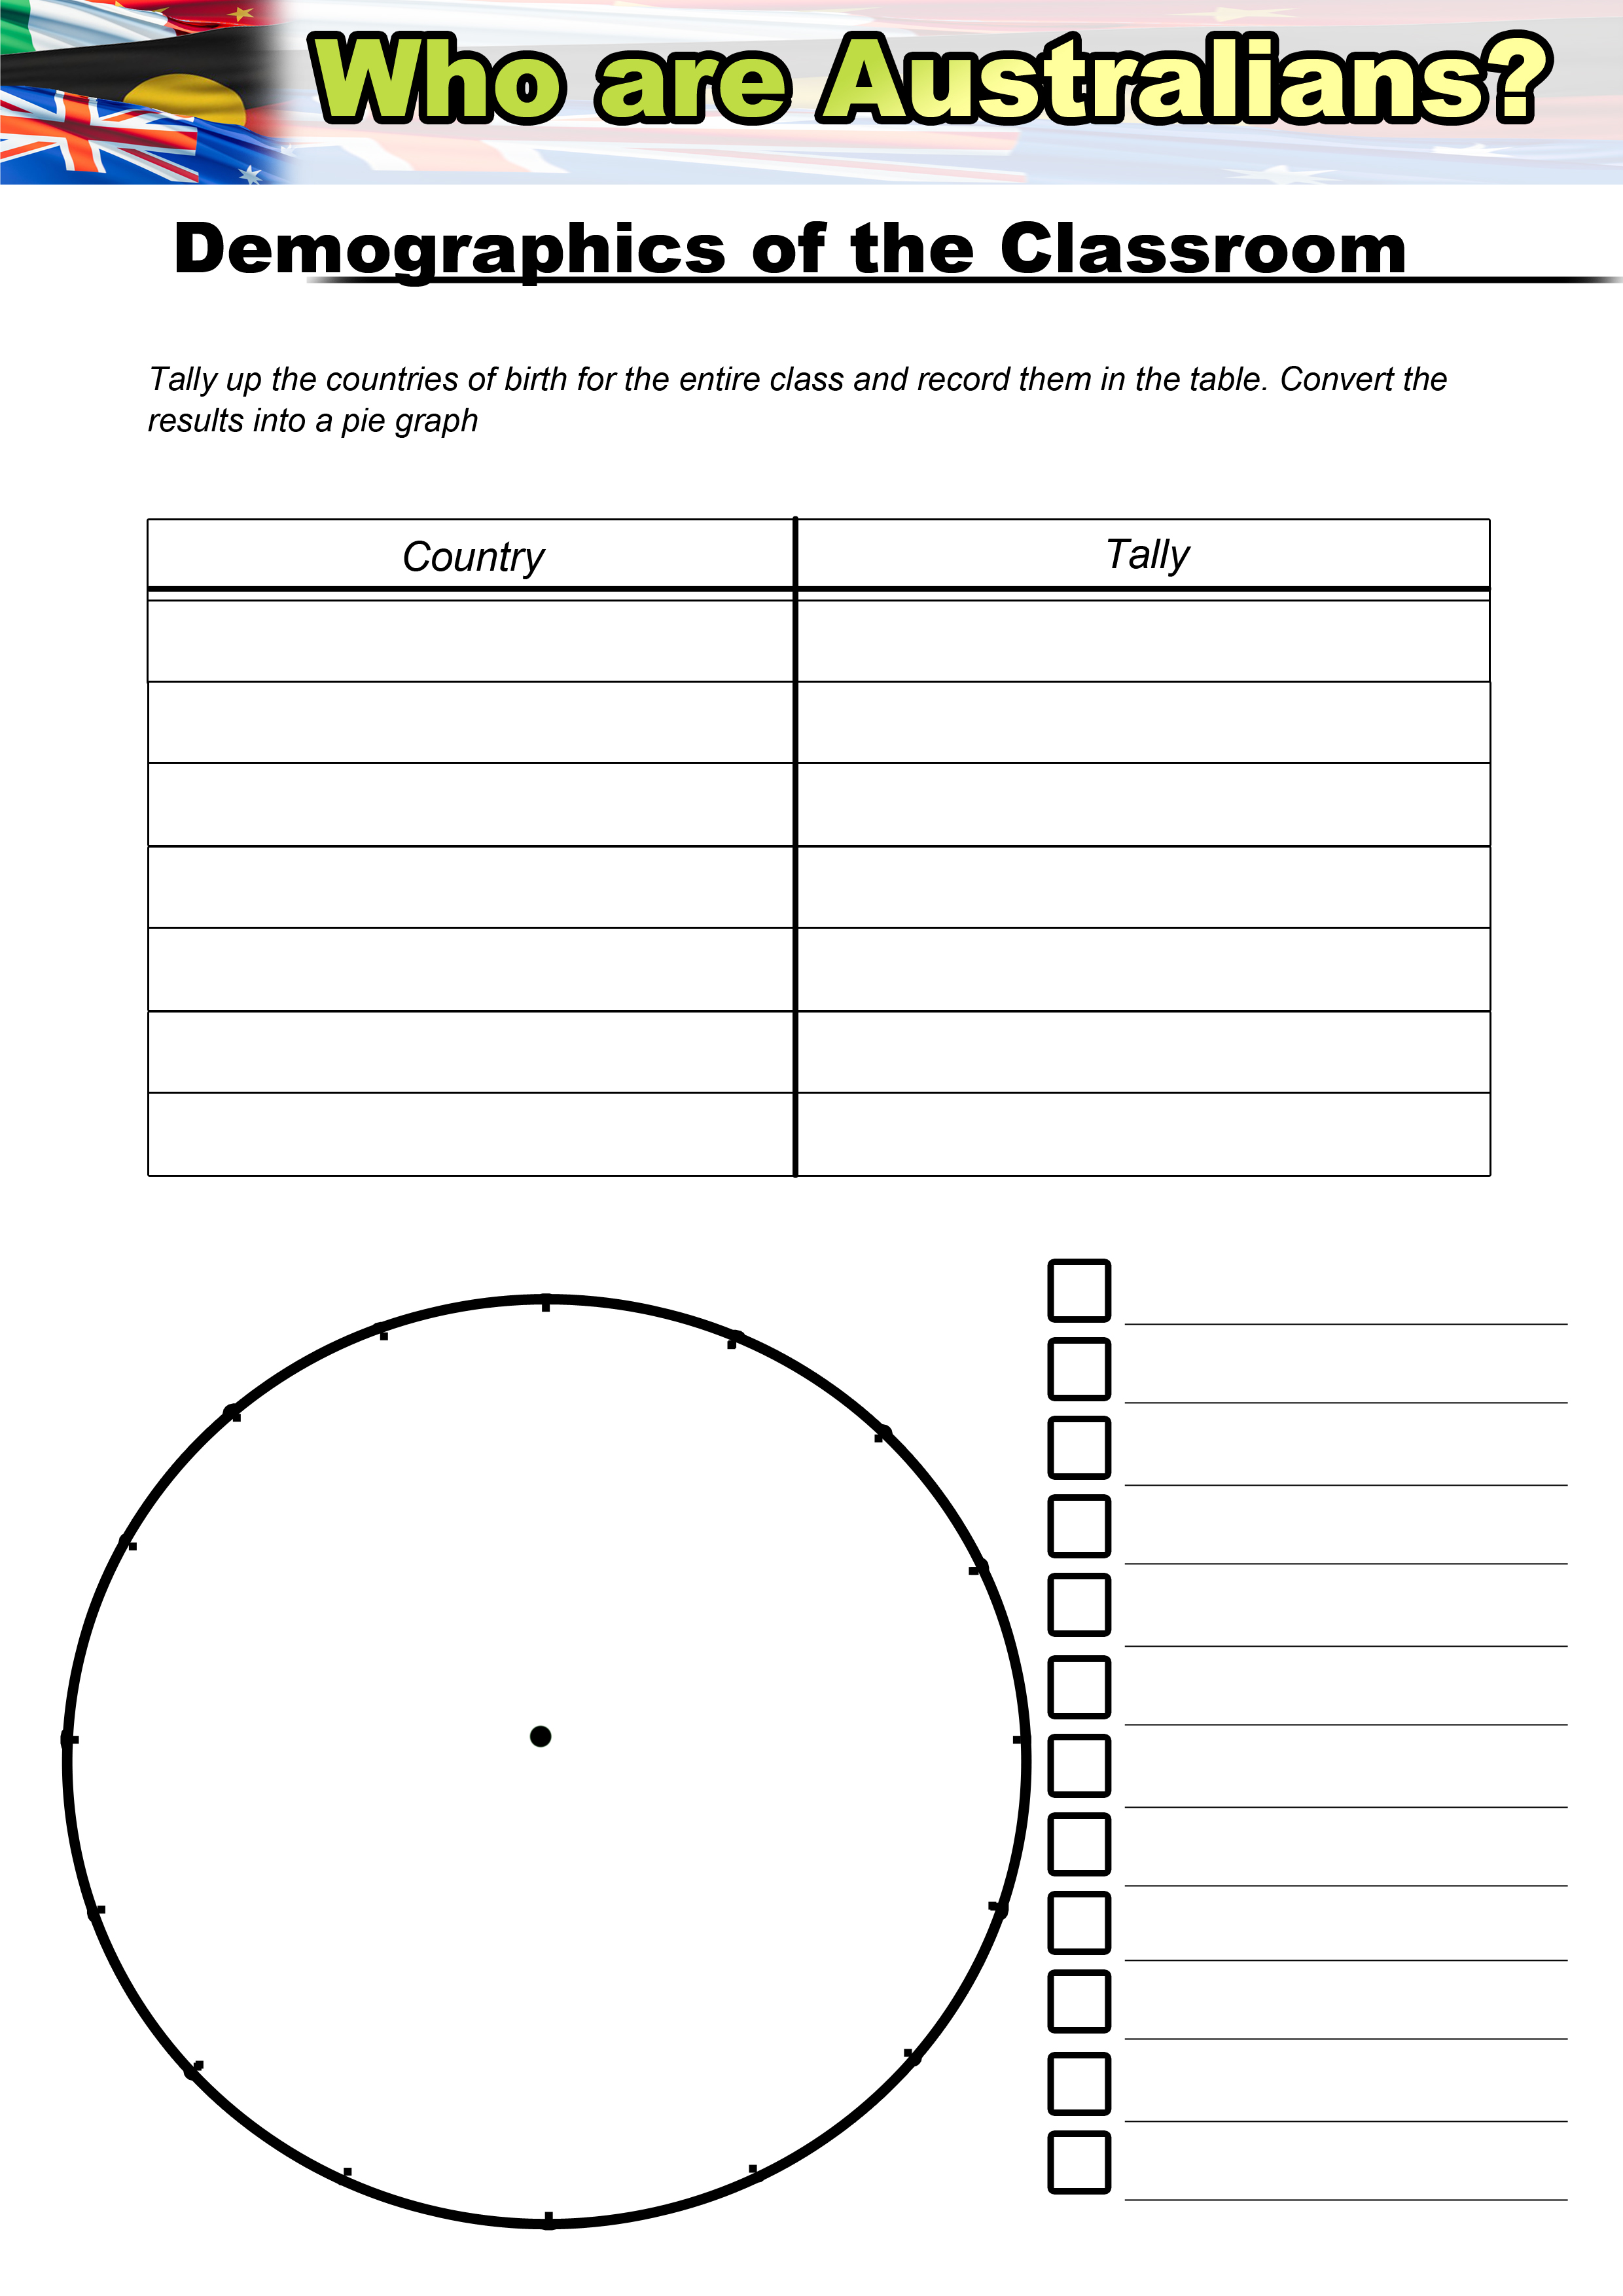 Free Primary School Resources Worksheets For Kids